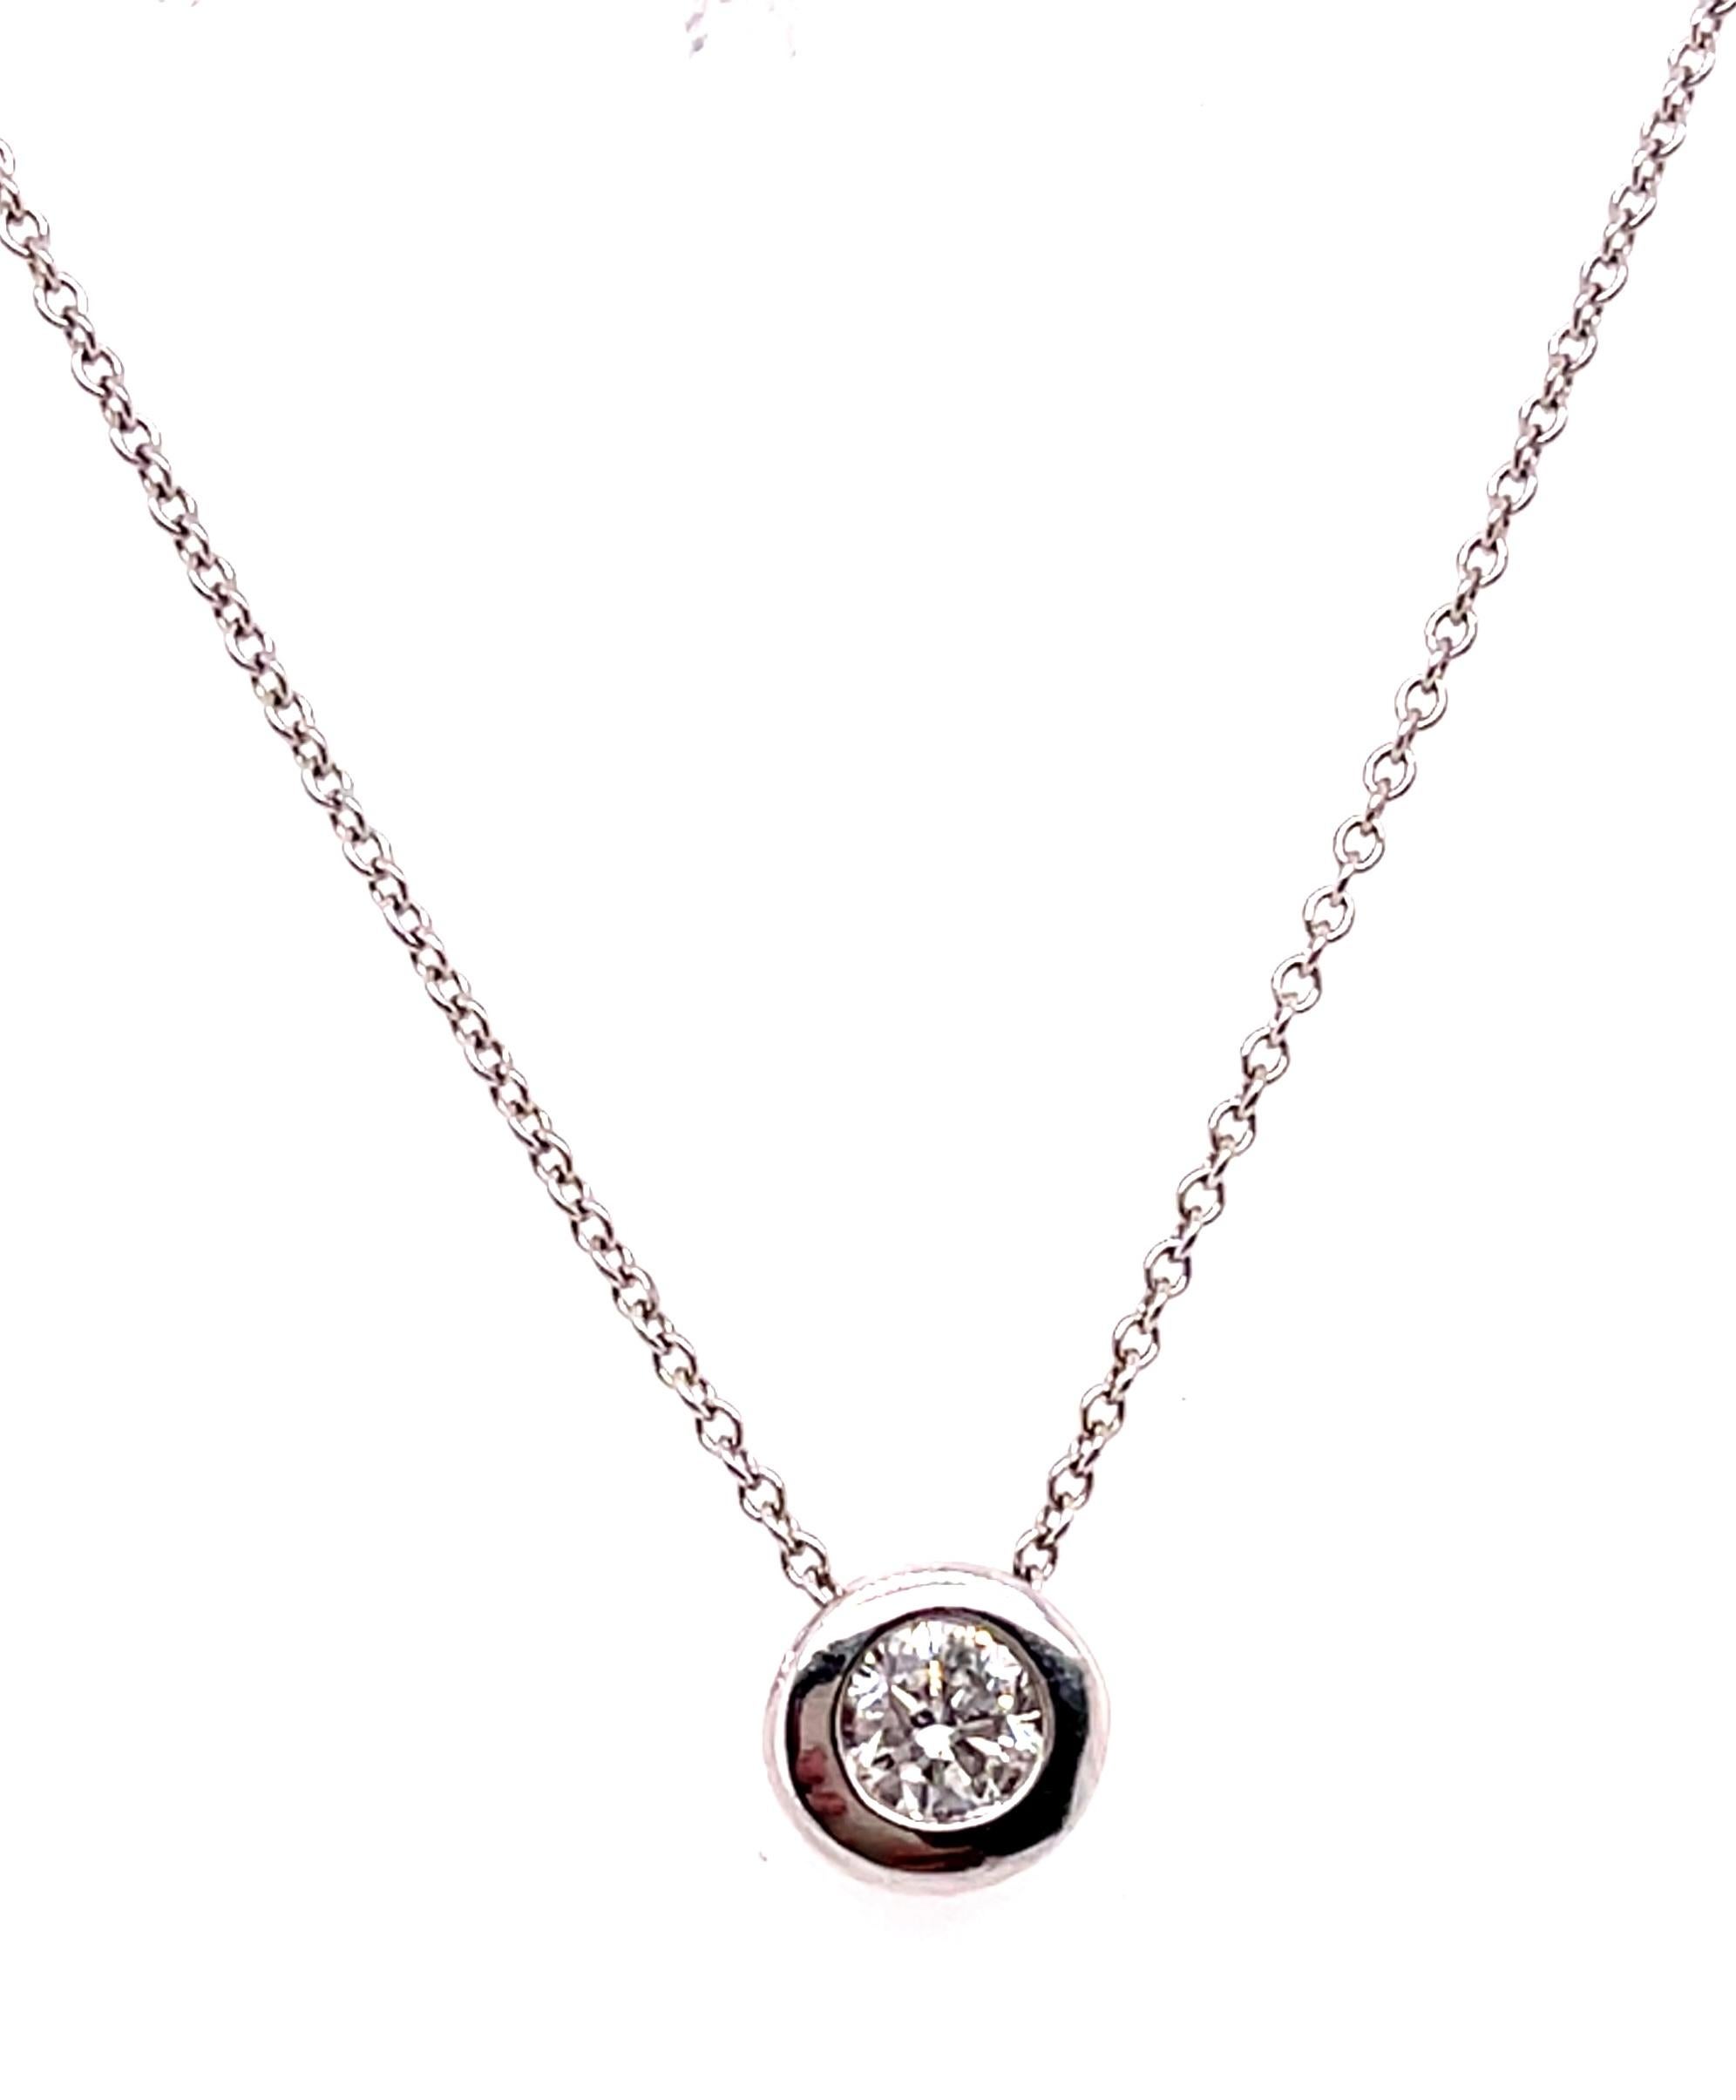 Round Cut 14 Karat White Gold Fancy Necklace with Diamond Pendant For Sale